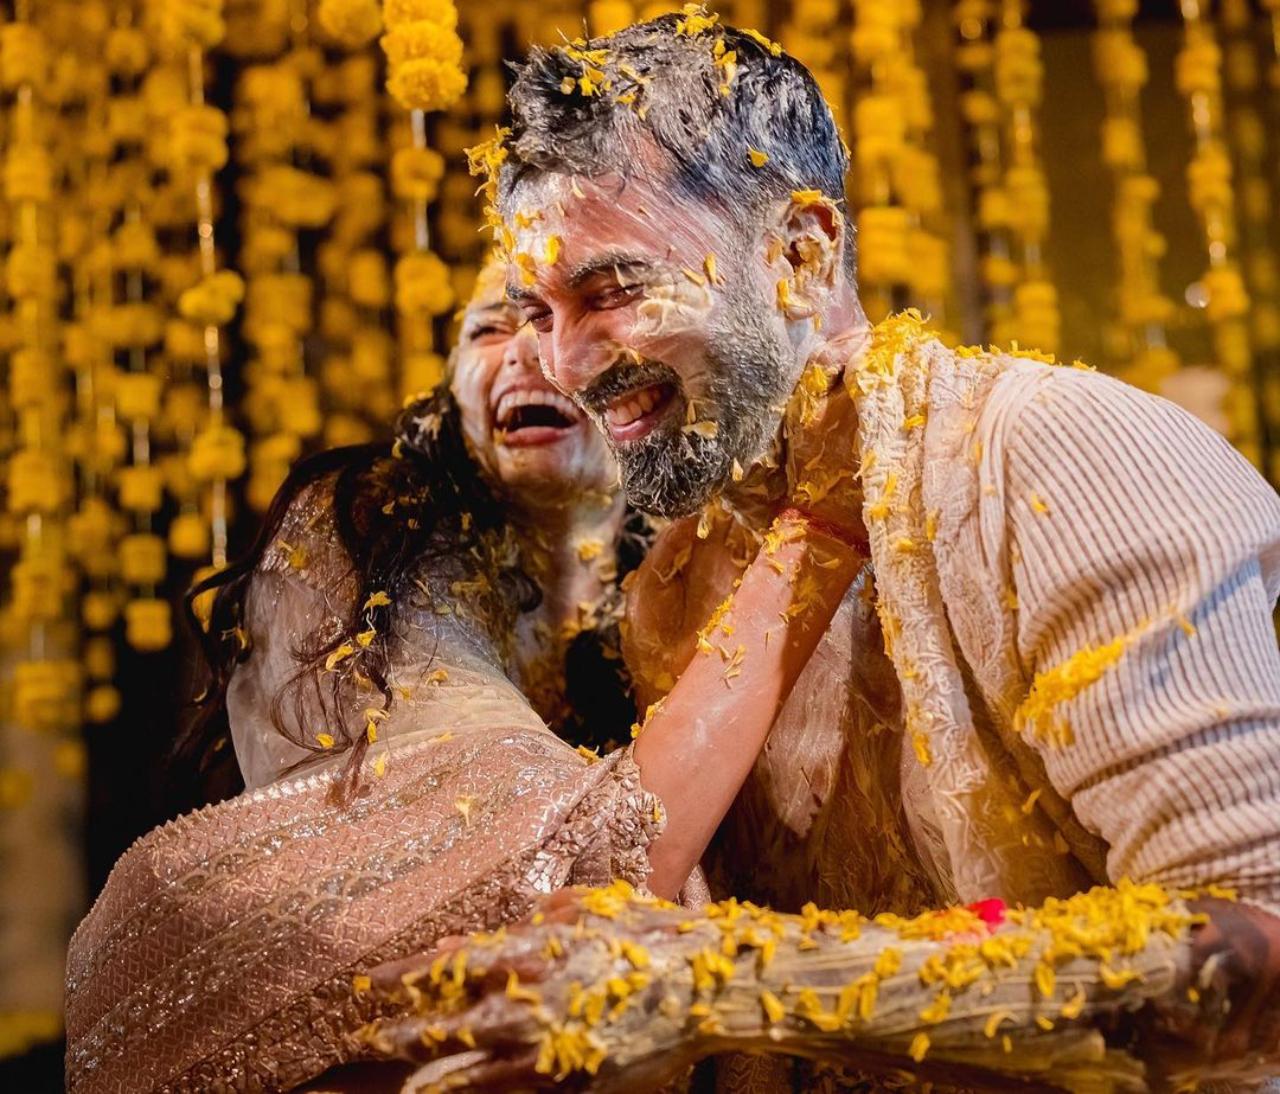 On Friday, Athiya took to her Instagram handle to share pictures from their pre-wedding festivities. The actress gave glimpses into the haldi ceremony that takes place before the wedding